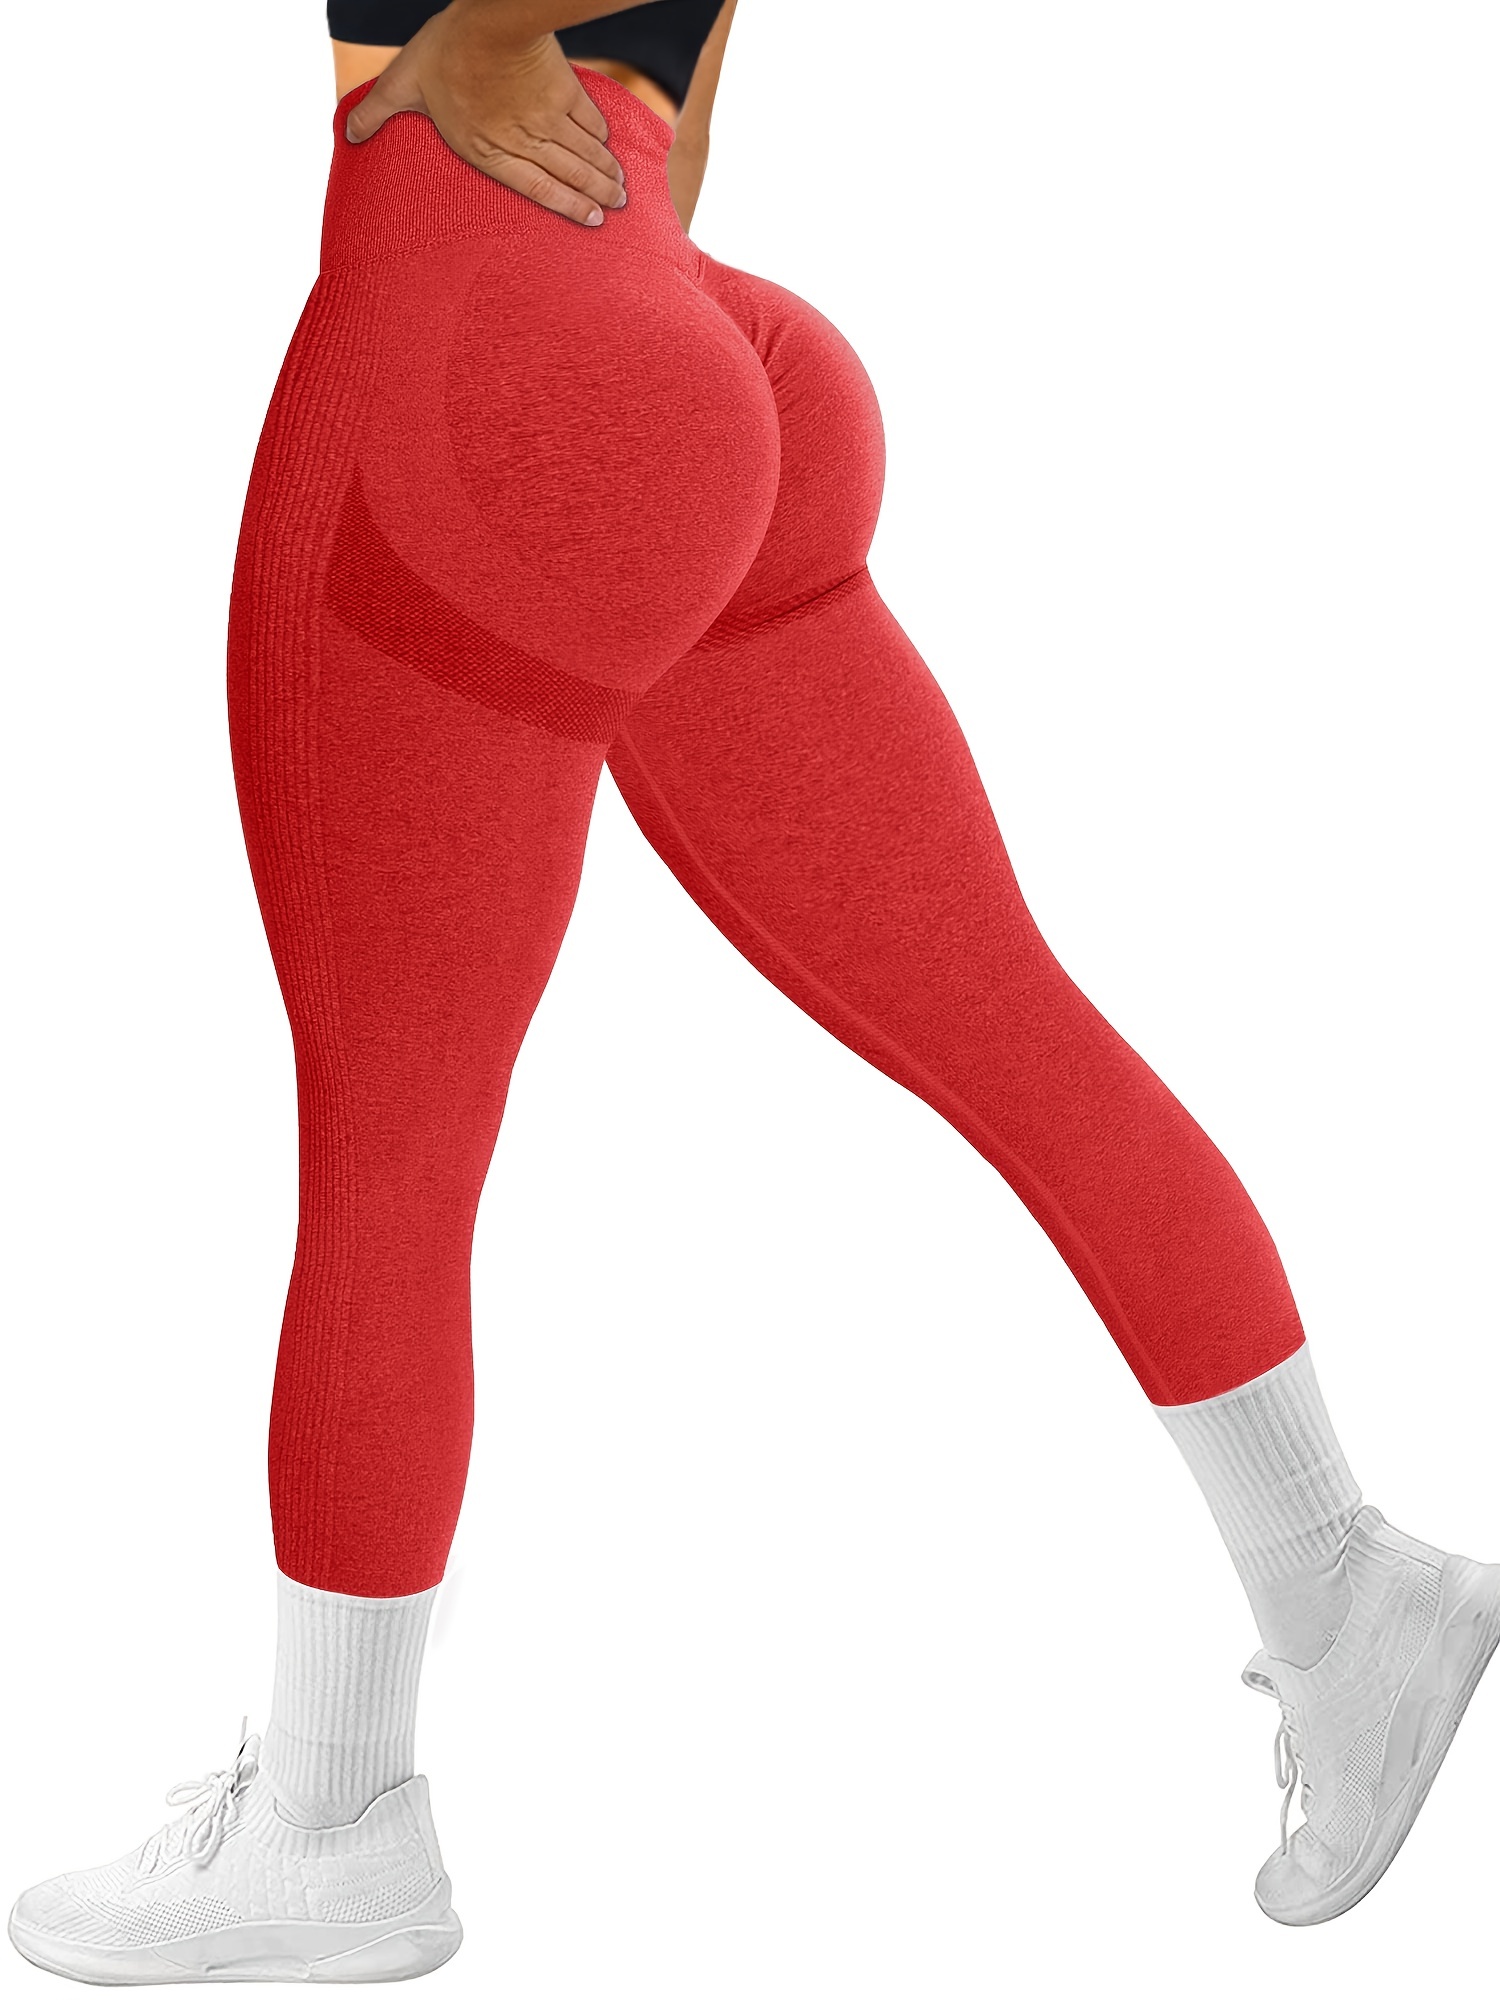 ass tight leggings, ass tight leggings Suppliers and Manufacturers at